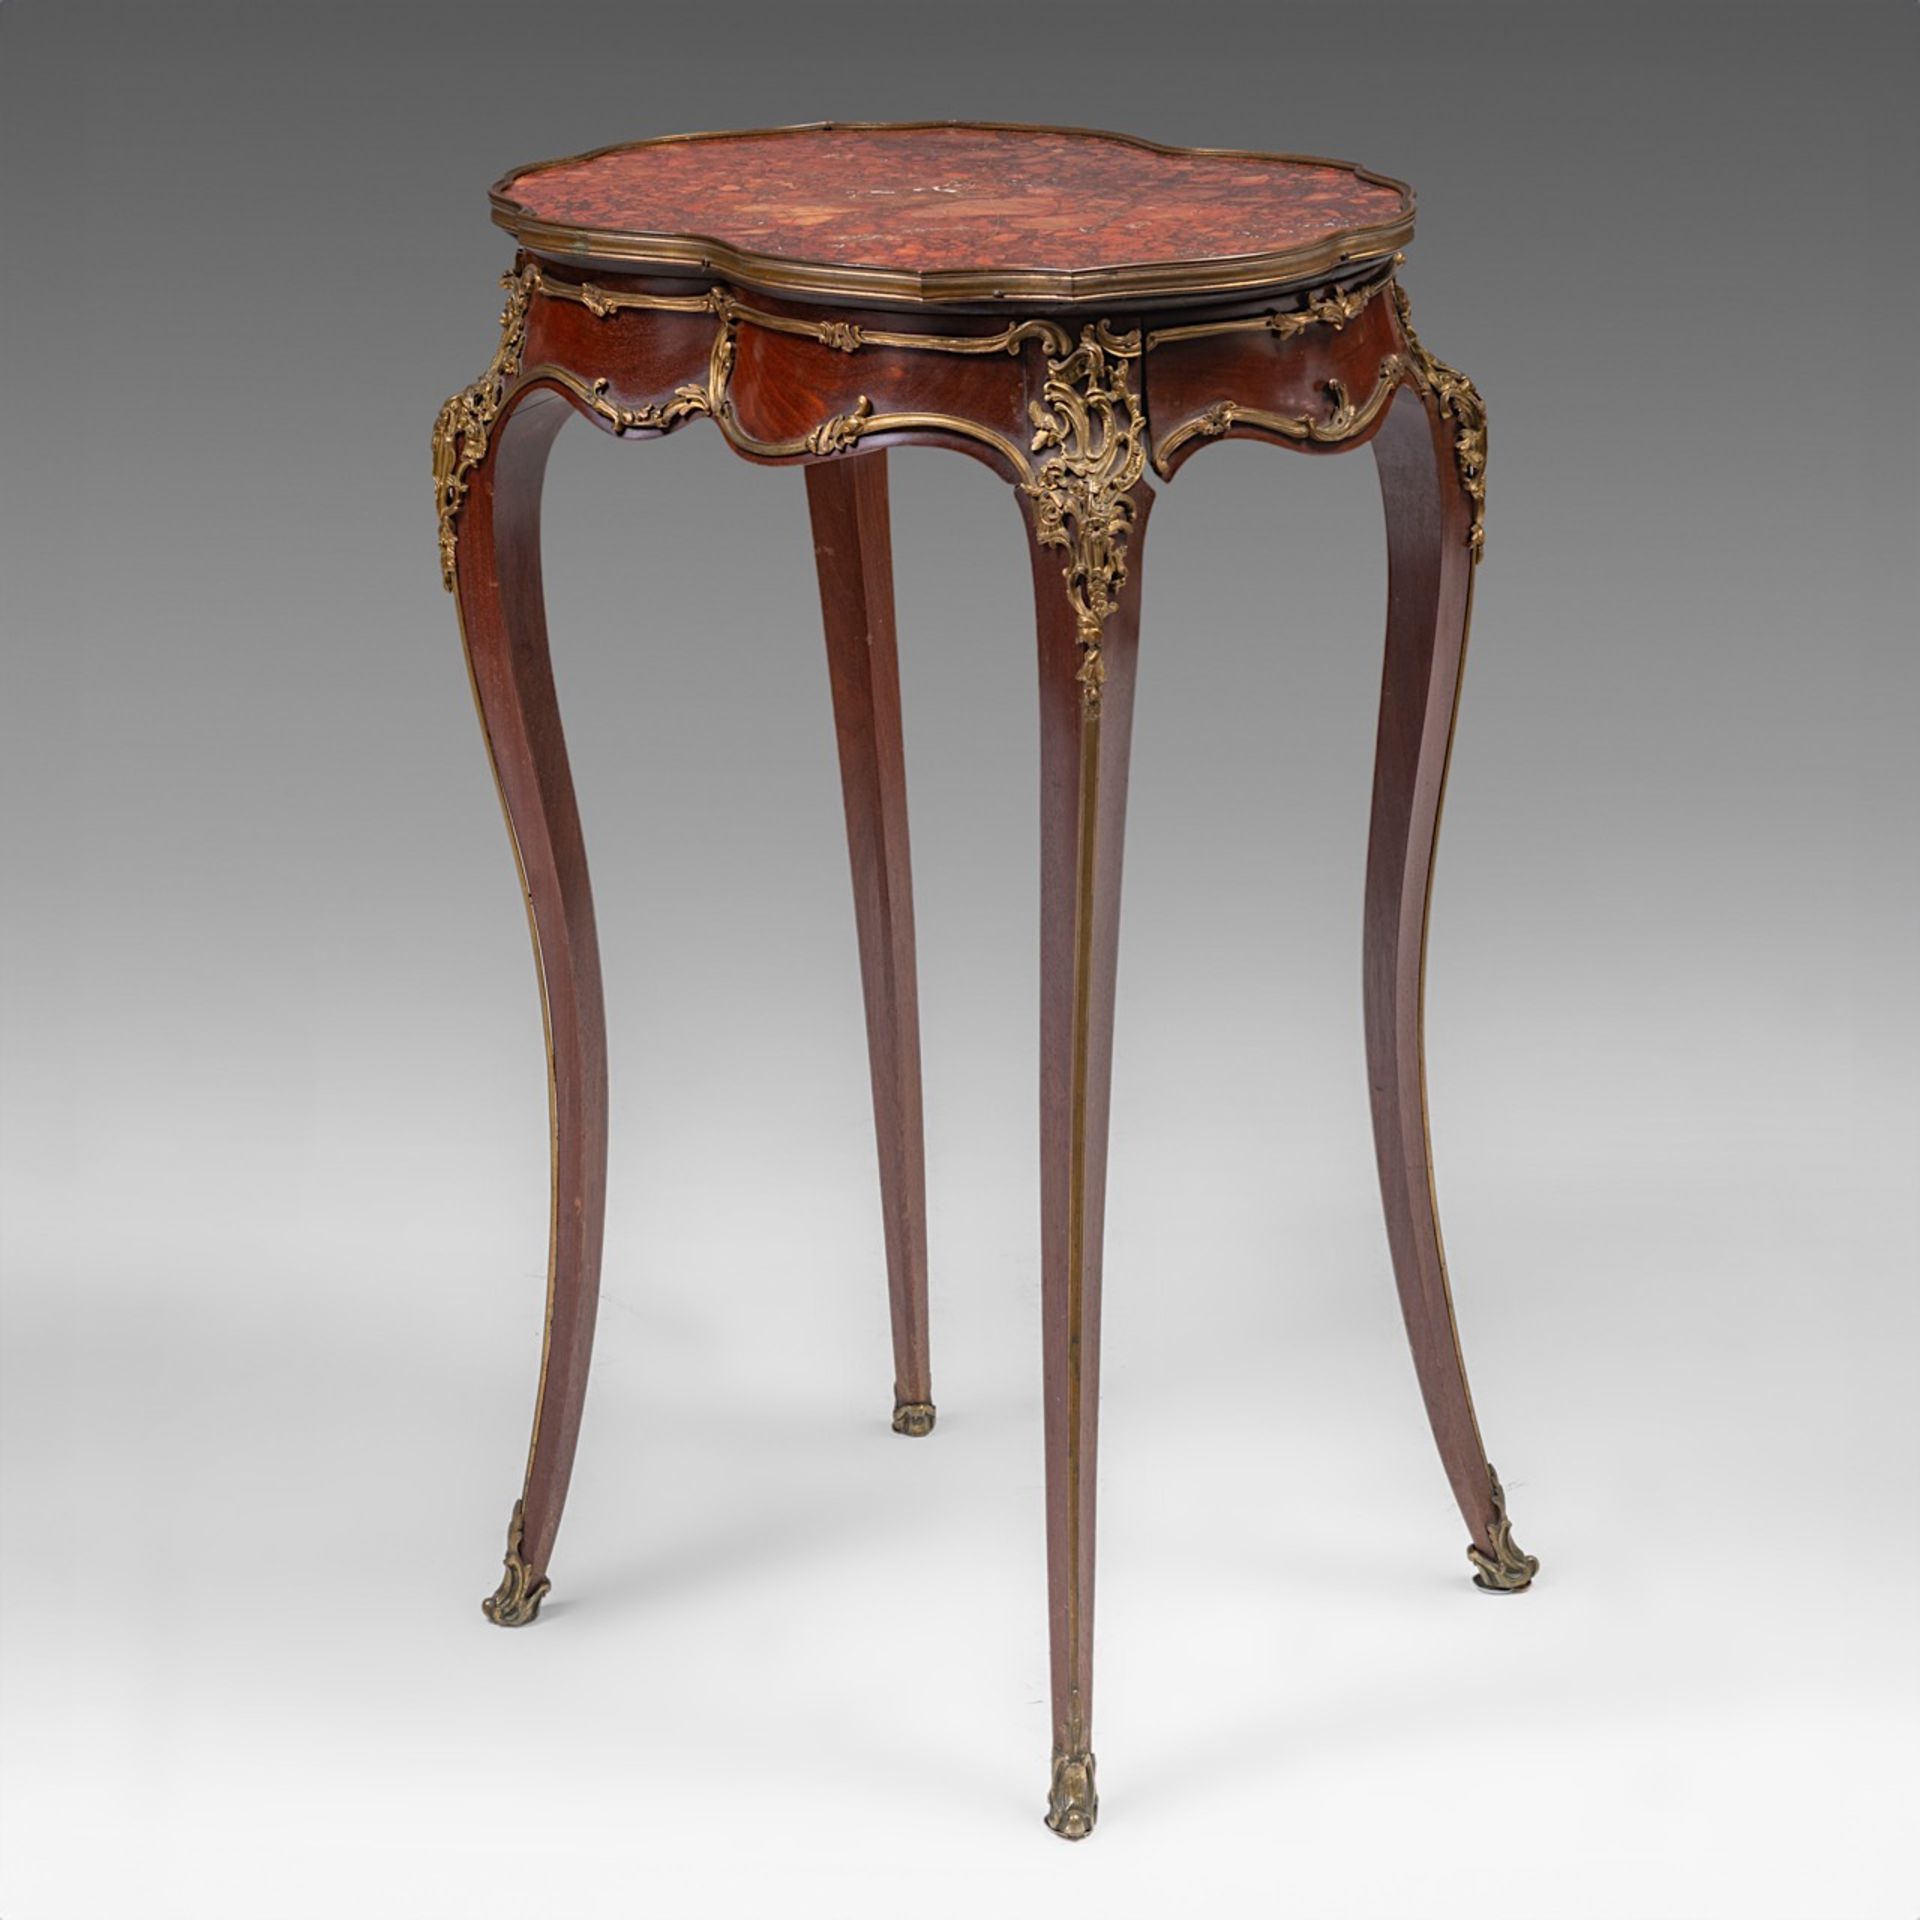 A mahogany marble-topped Louis XV (1723-1774) occasional table with gilt bronze mounts, H 77,5 cm -